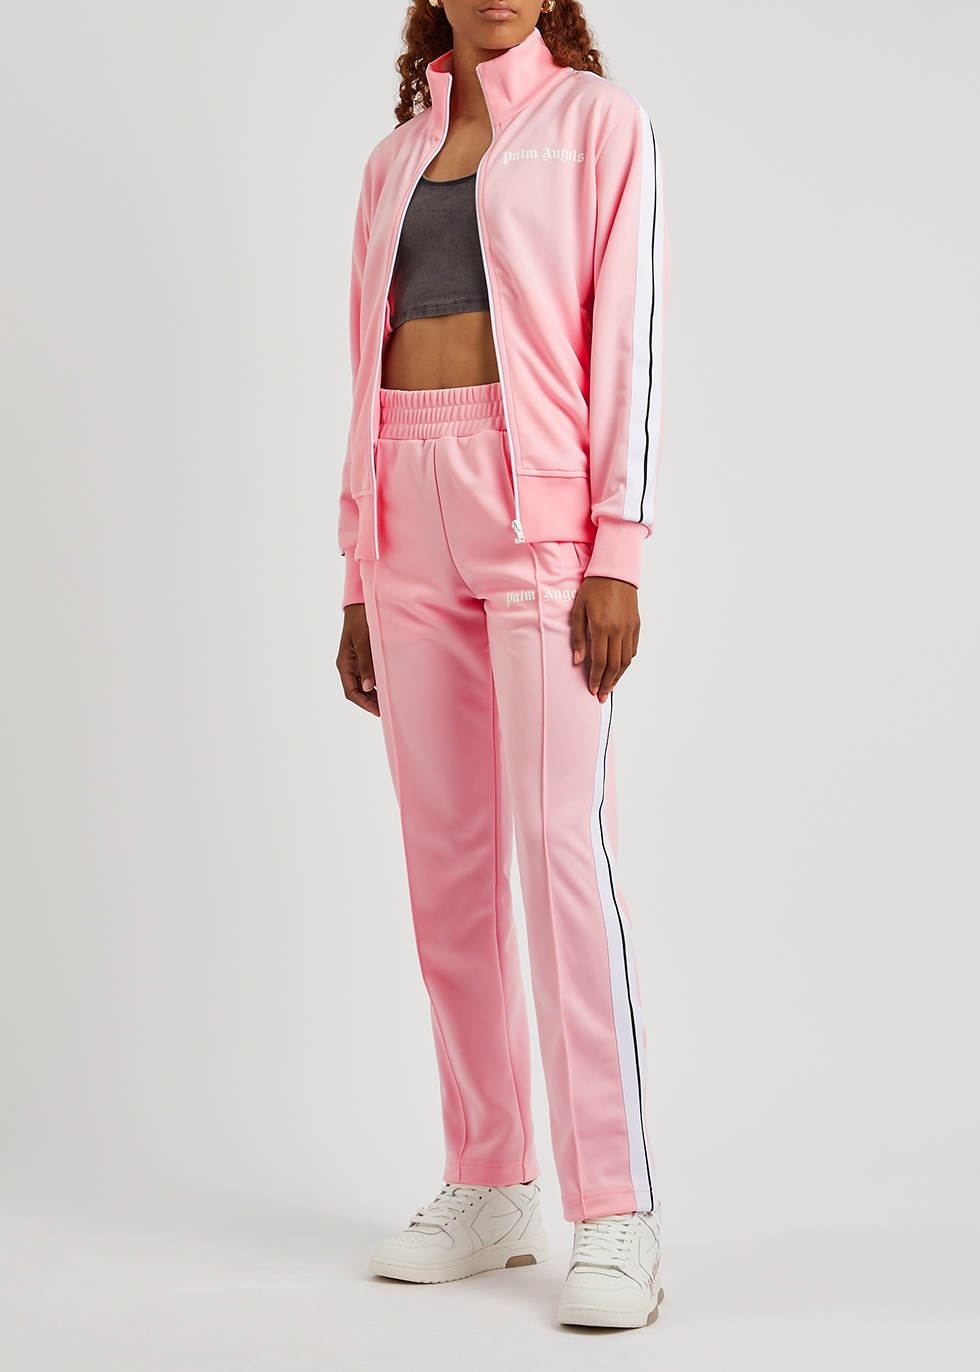 BLOSSOM PINK TRACK PANTS in pink - Palm Angels® Official